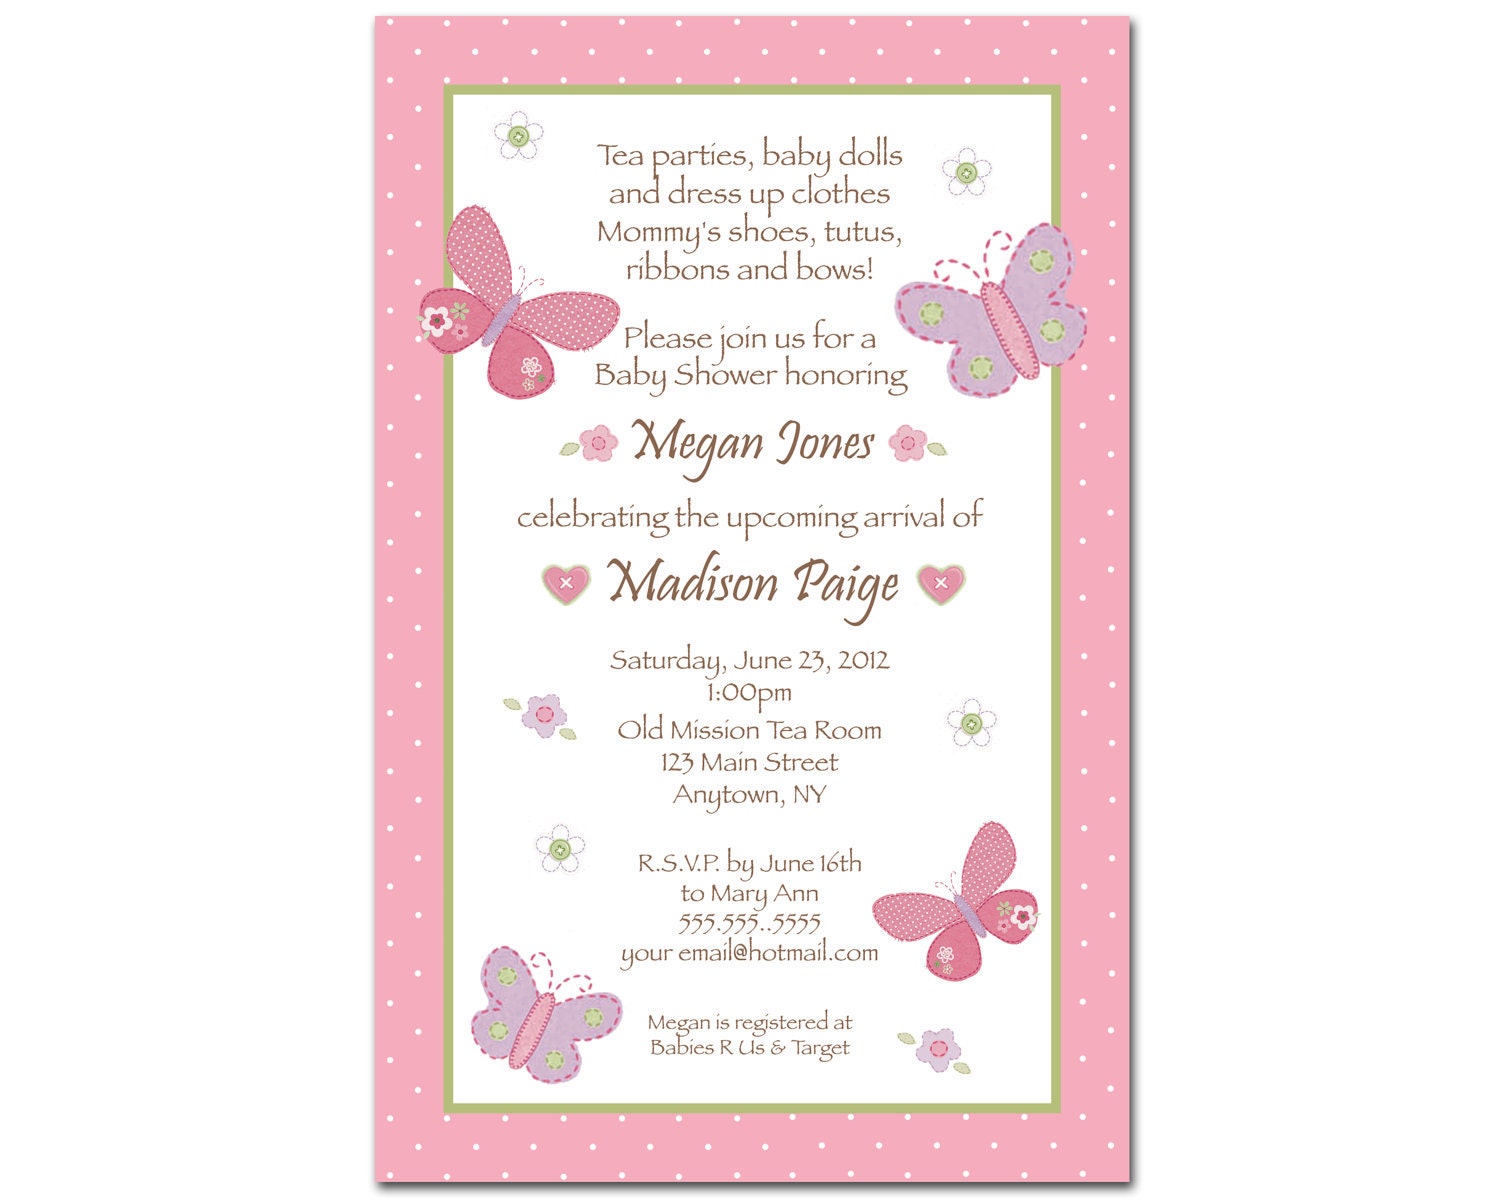 ... baby shower by bdesigns4you on etsy butterfly baby shower invitations